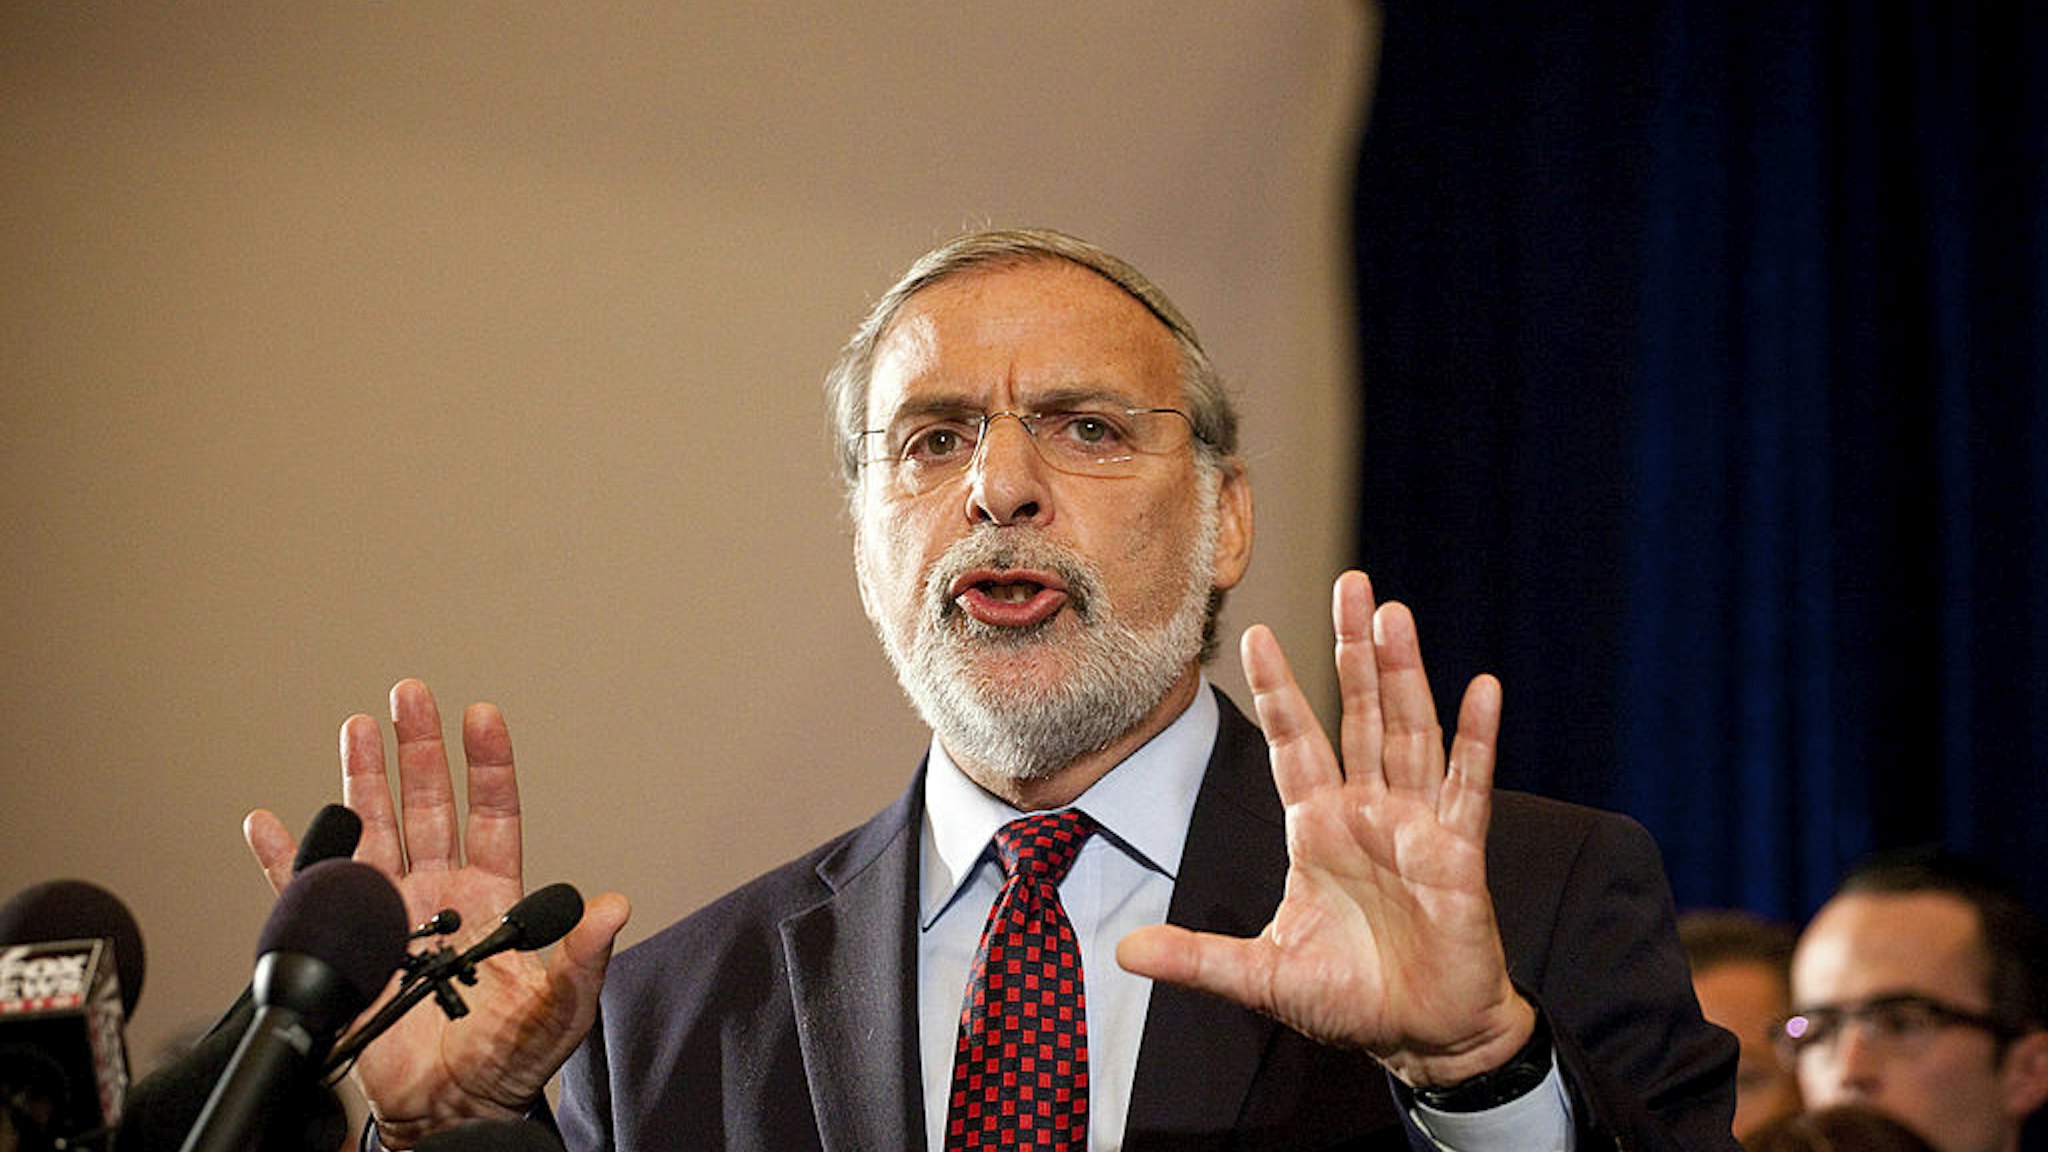 Democratic New York State Assemblyman Dov Hikind speaks at a press conference with American and Israeli Jewish leaders and supporters of Israel in the Great Room at the W Hotel Union Square, where Texas Governor and Republican presidential hopeful Rick Perry attacked President Barack Obama's foreign policy, on September 20, 2011 in New York City.